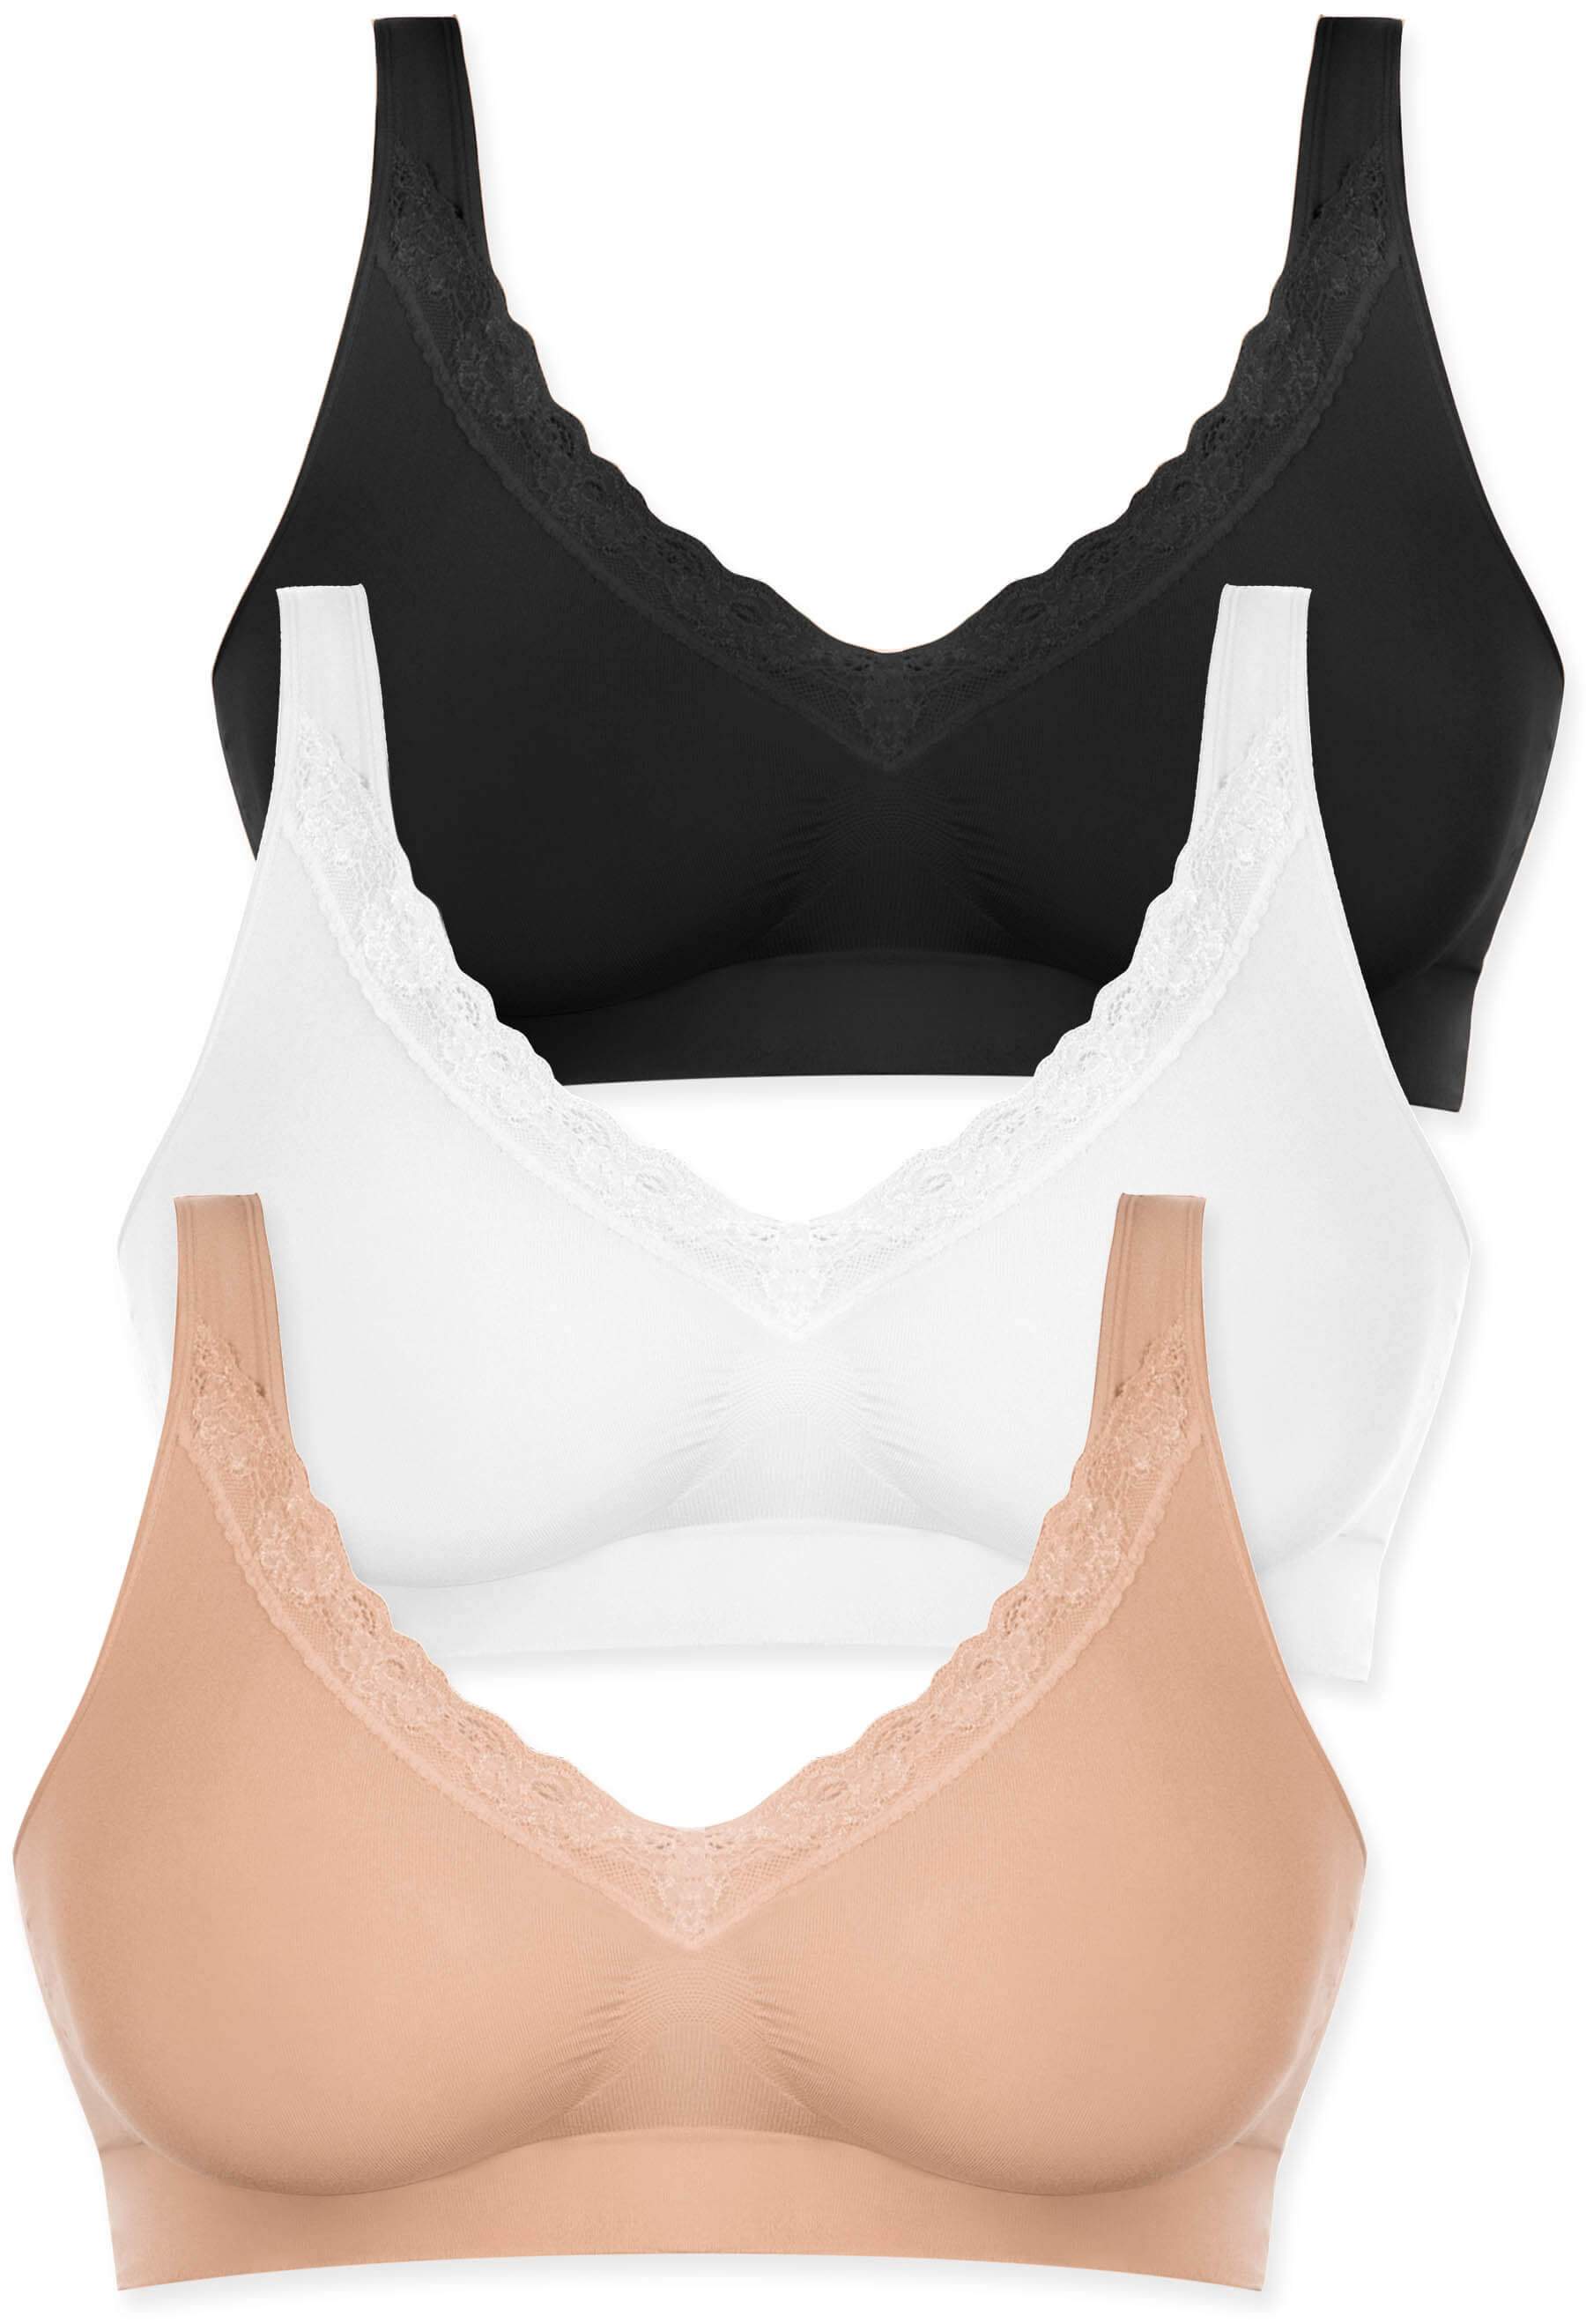 Pull Over Cotton Rich Casual Sleep Bra Classic Style